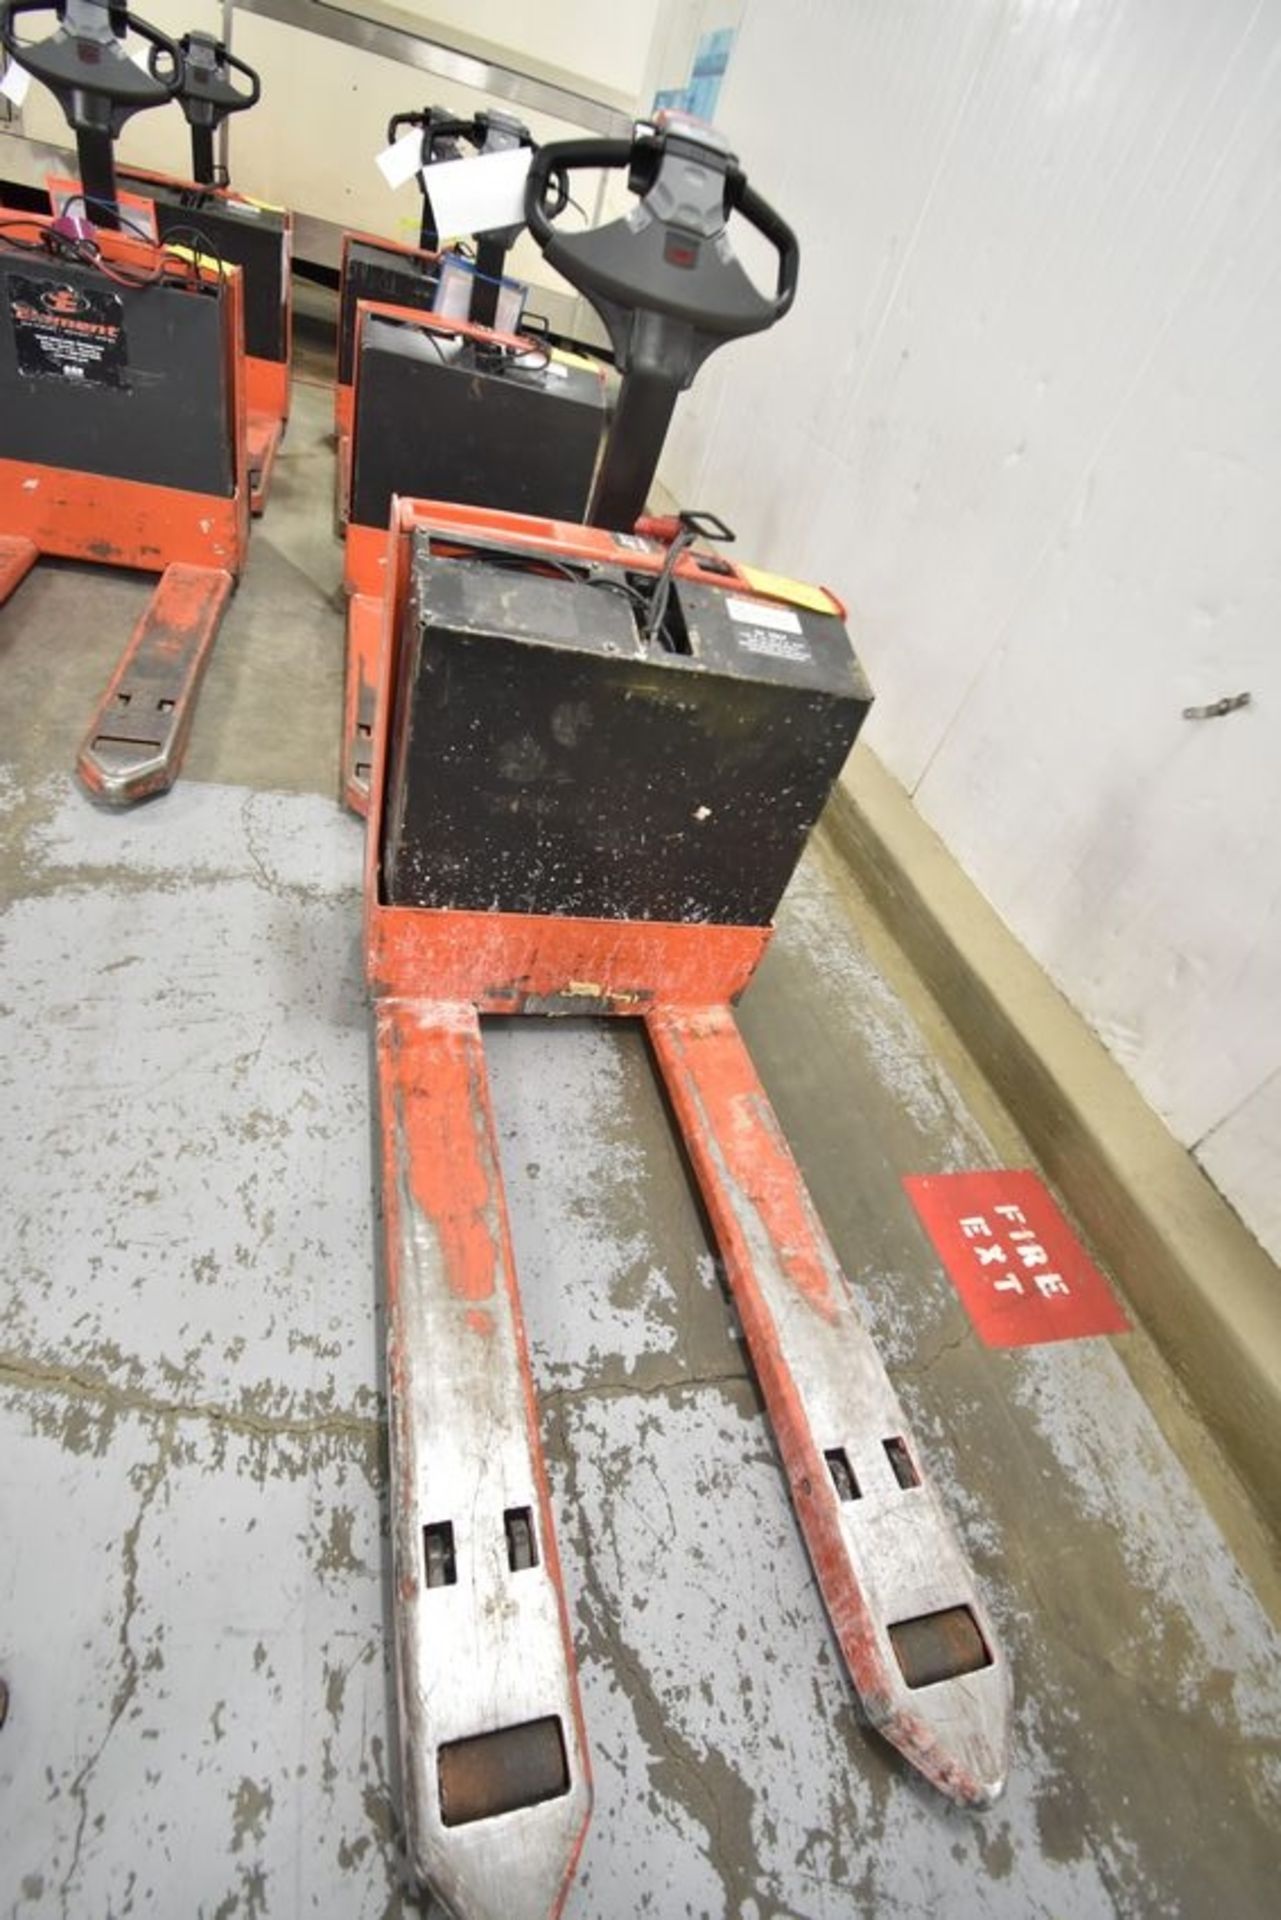 Toyota | Toyota Electric Pallet Jack Model 7HBW23, S/N 7HBW23-50420. 4500 lbs capacity, 24 volt ( - Image 2 of 4